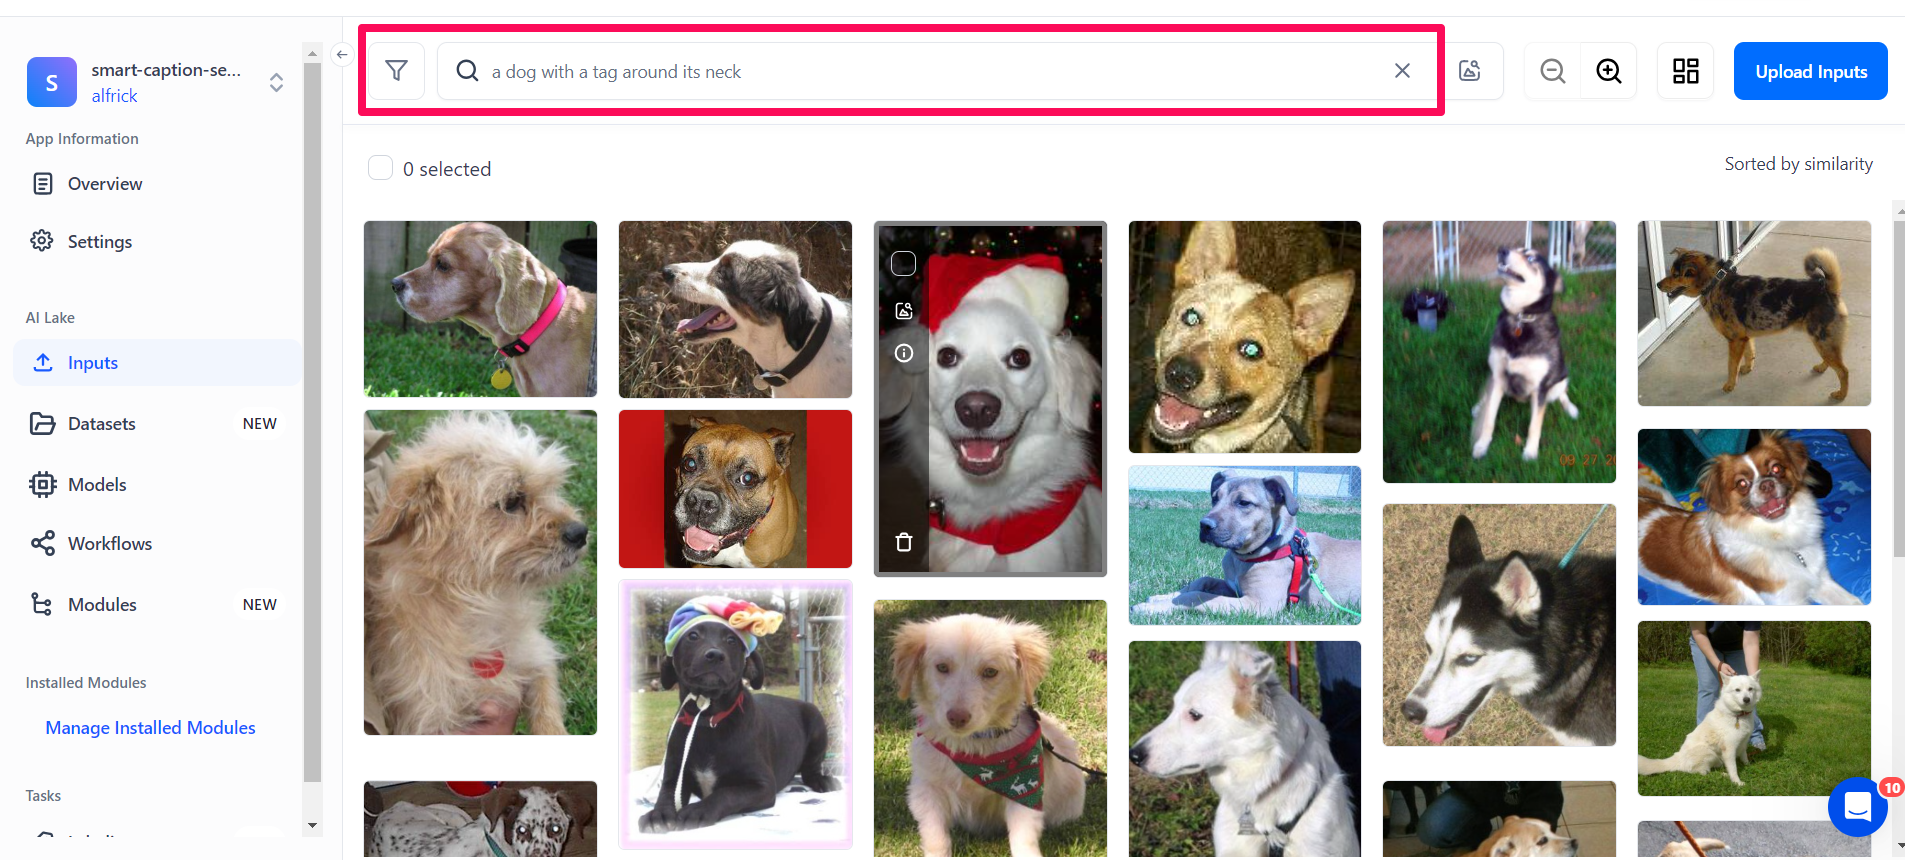 smart image search results